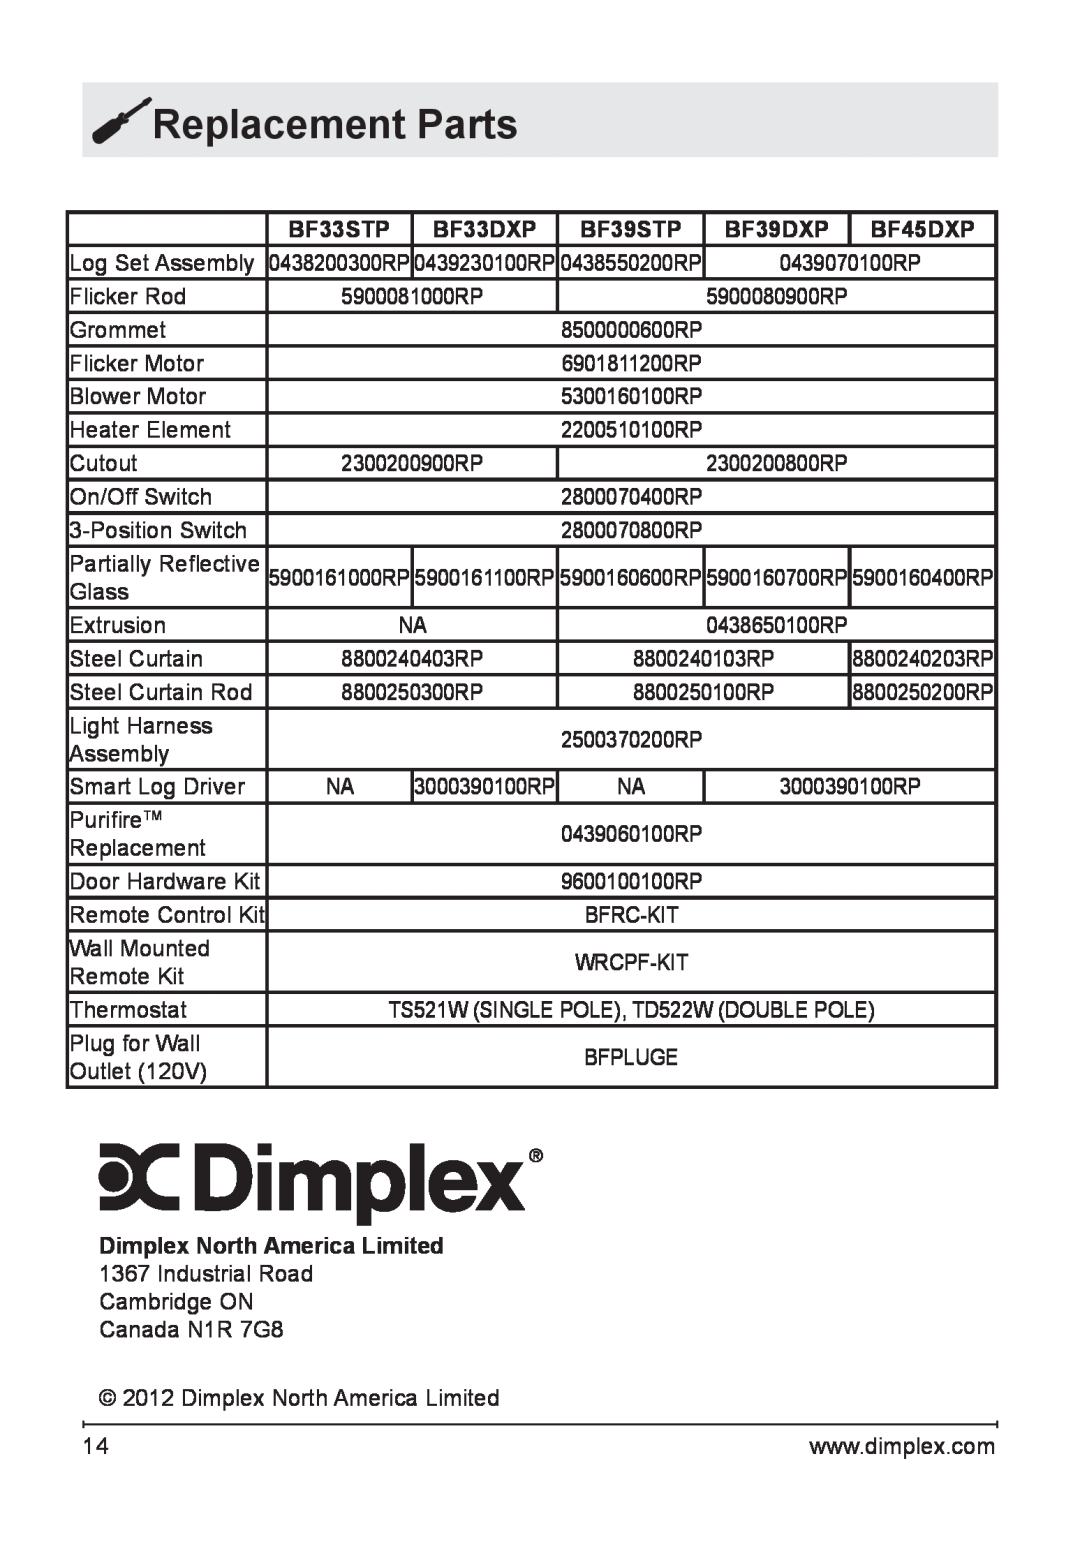 Dimplex BF45DXP owner manual Replacement Parts, BF33STP, BF33DXP, BF39STP, BF39DXP, Dimplex North America Limited 